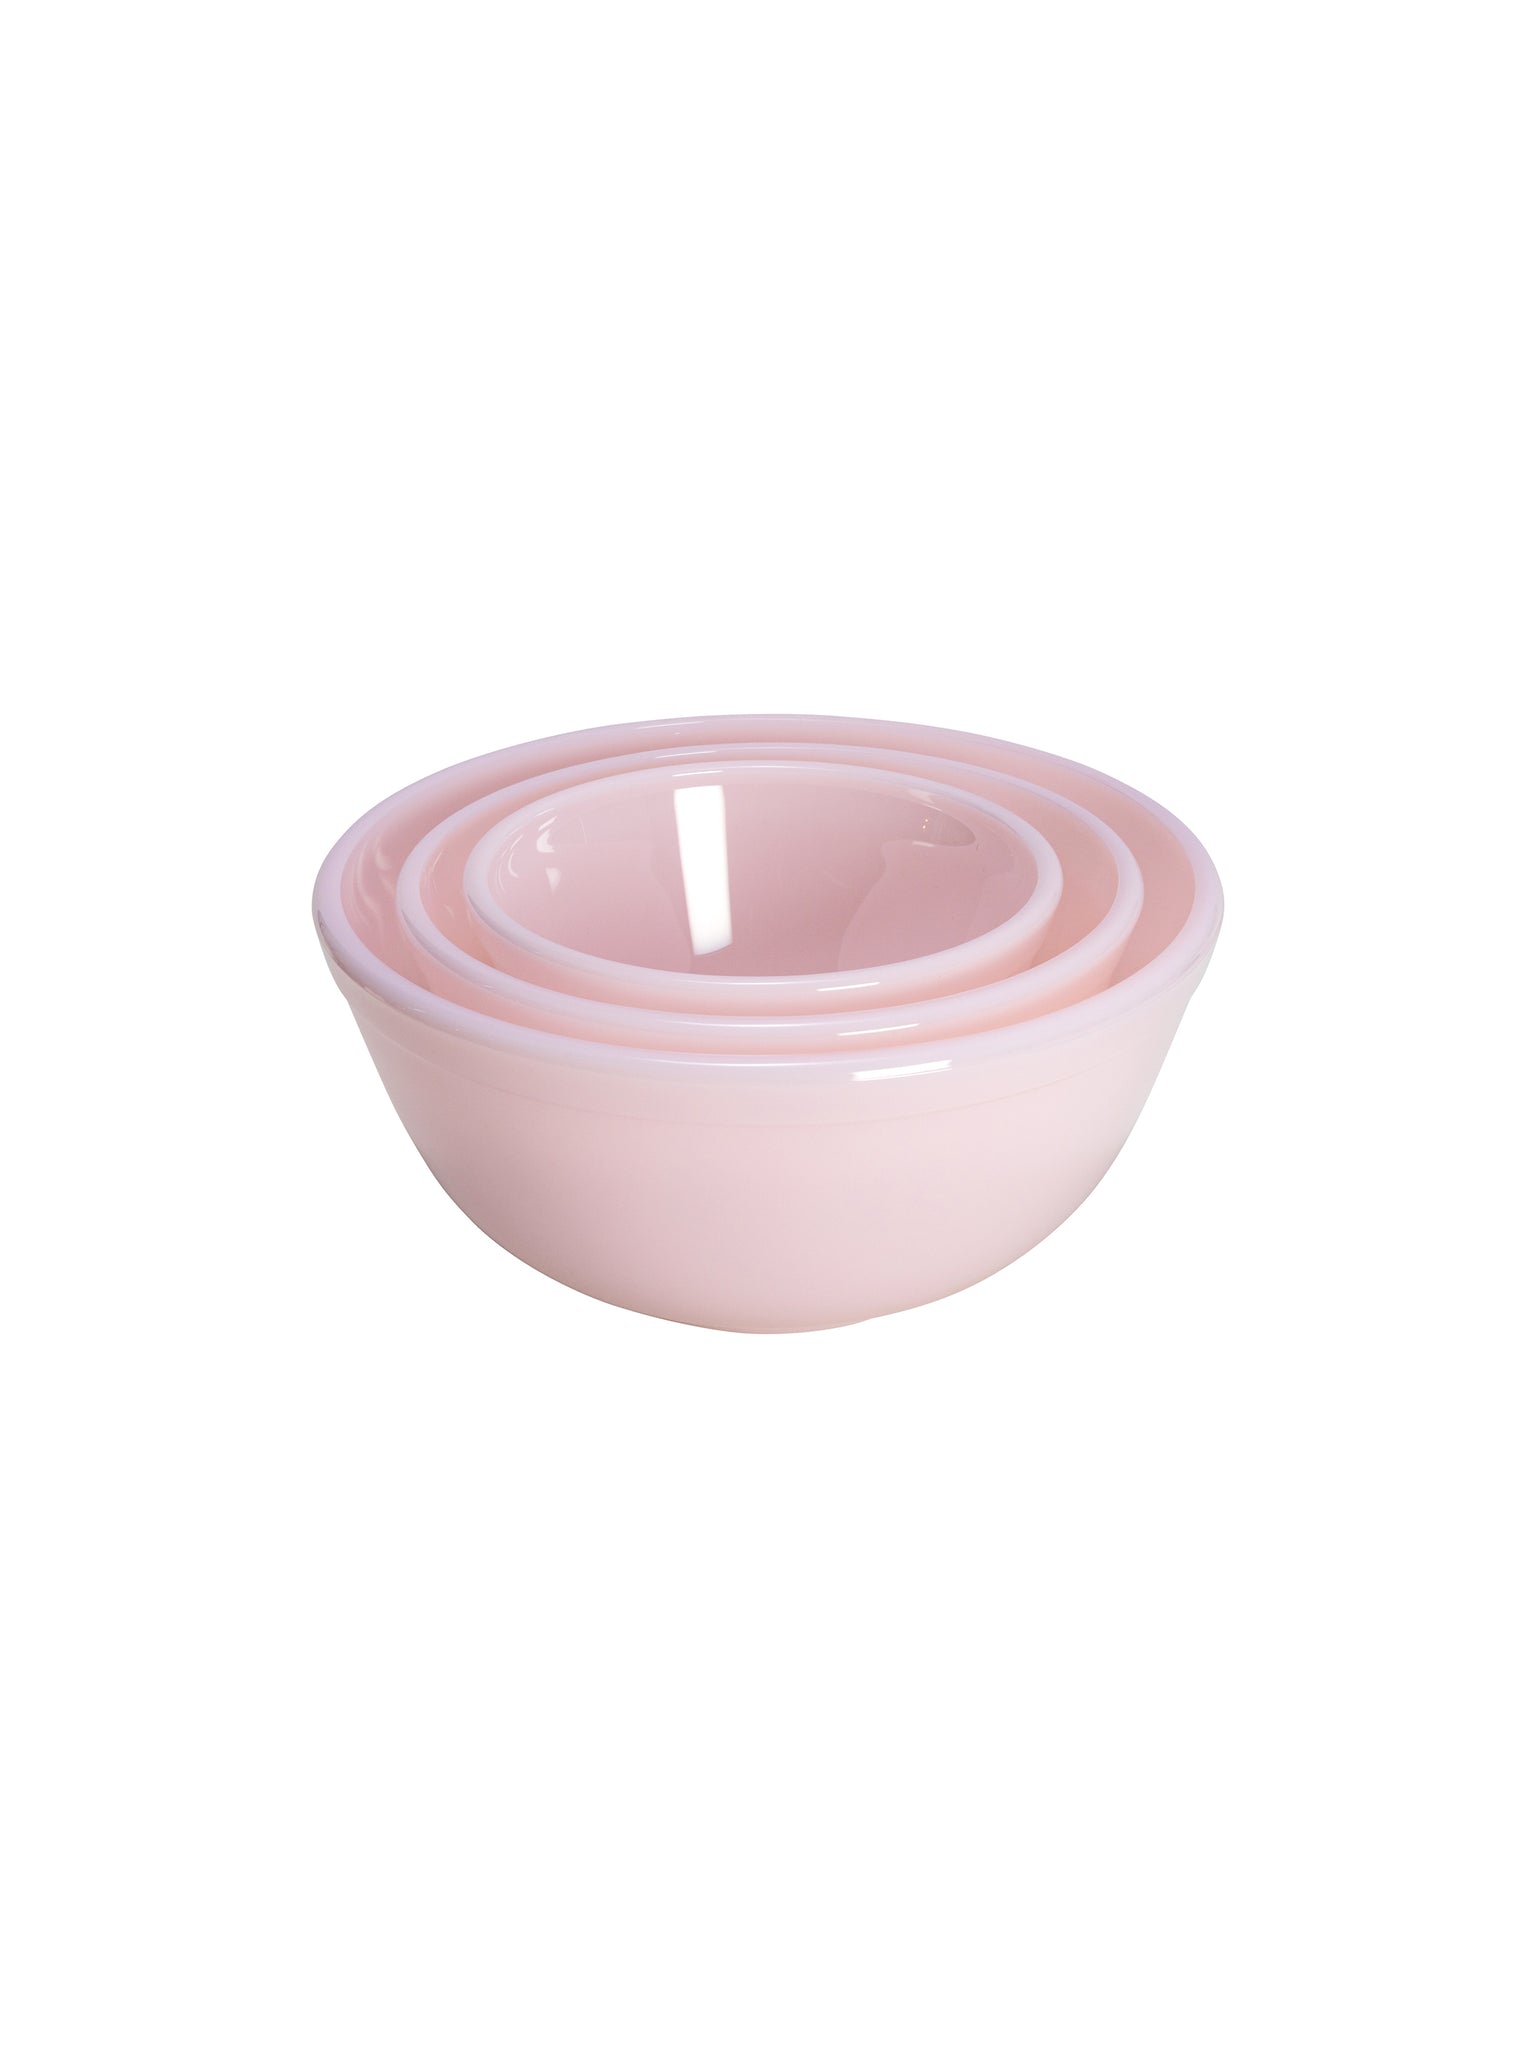 Mosser Glass 3 Piece Mixing Bowl Set Pink Weston Table